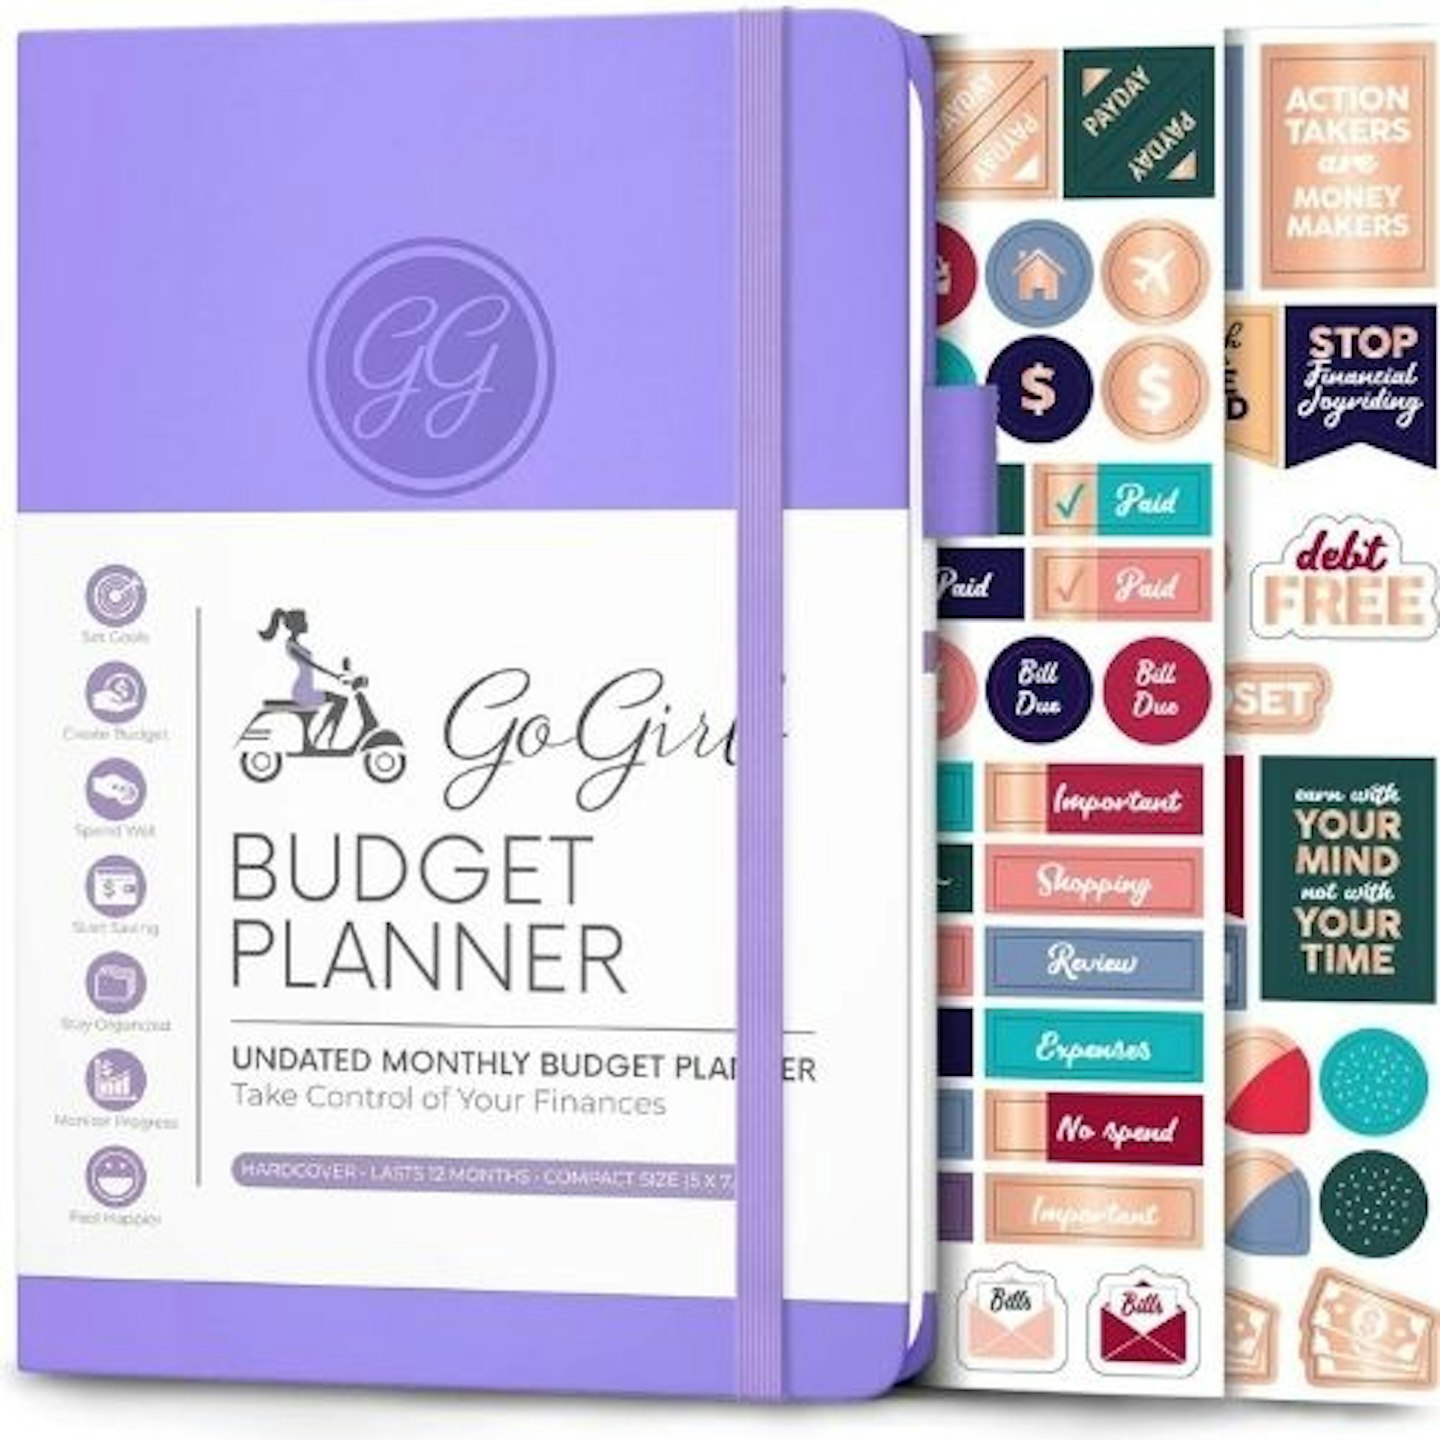 lilac gogirl budget planner